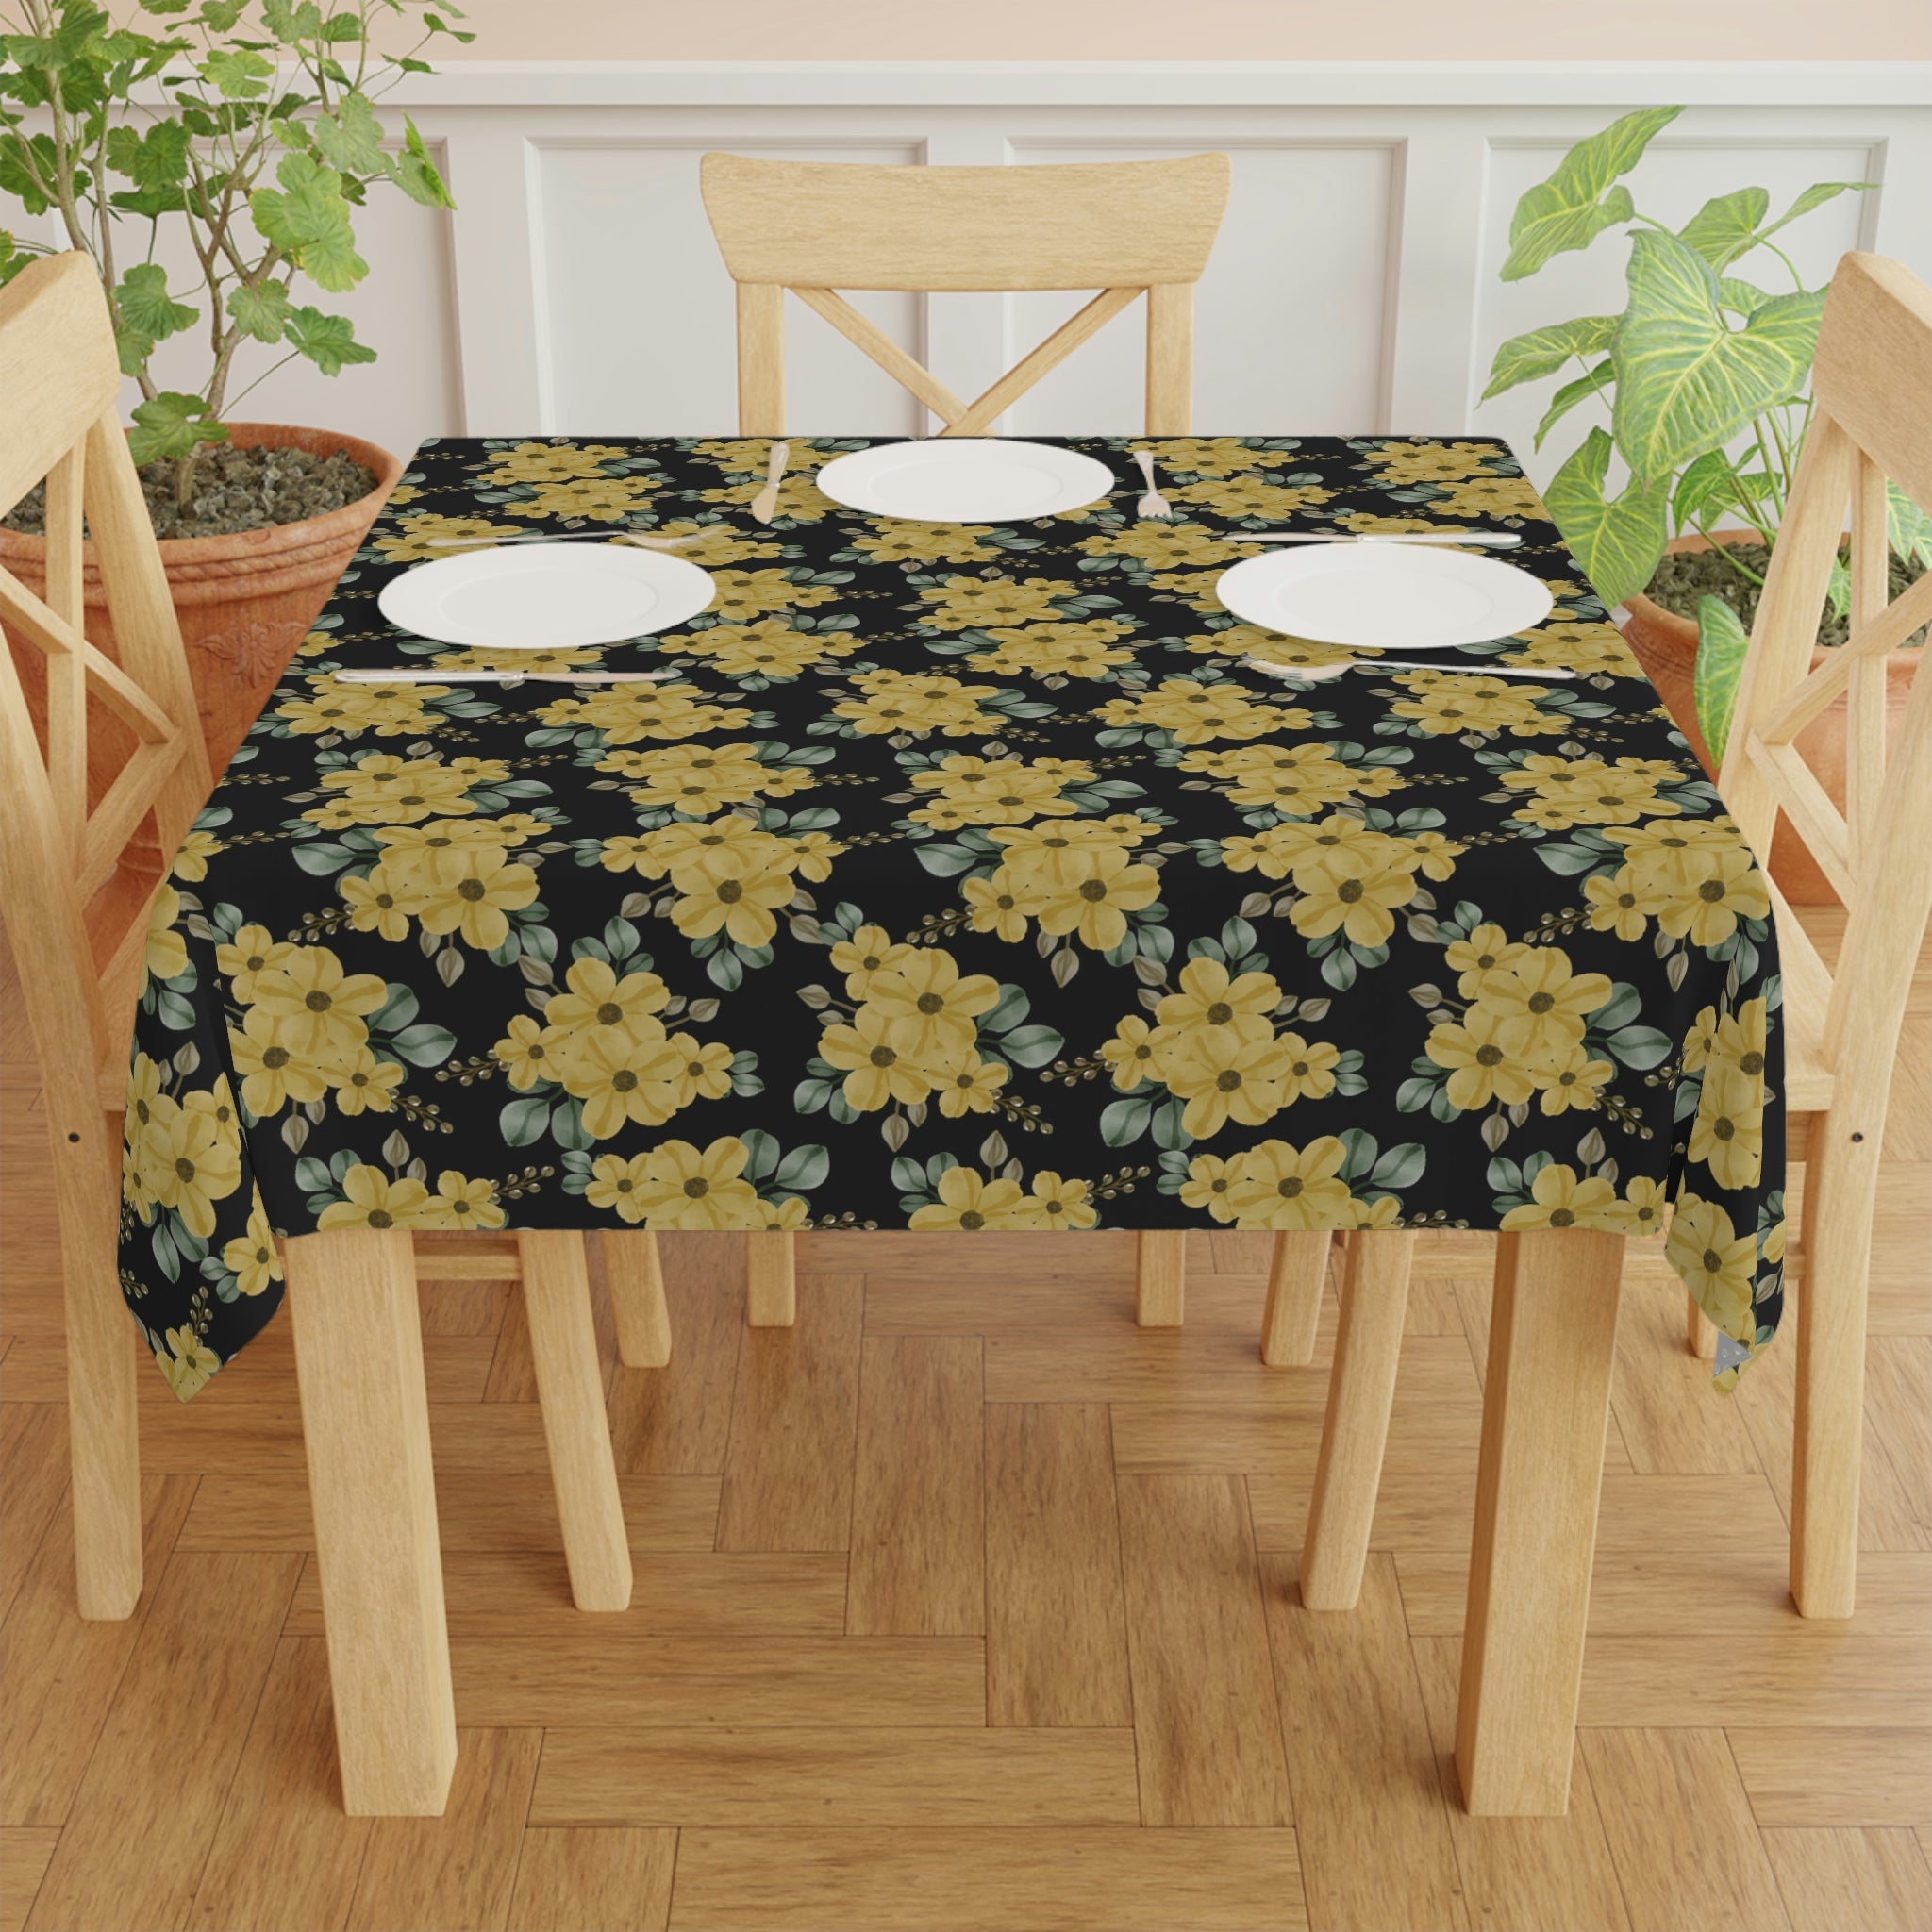 Yellow flowers - Black tablecloth